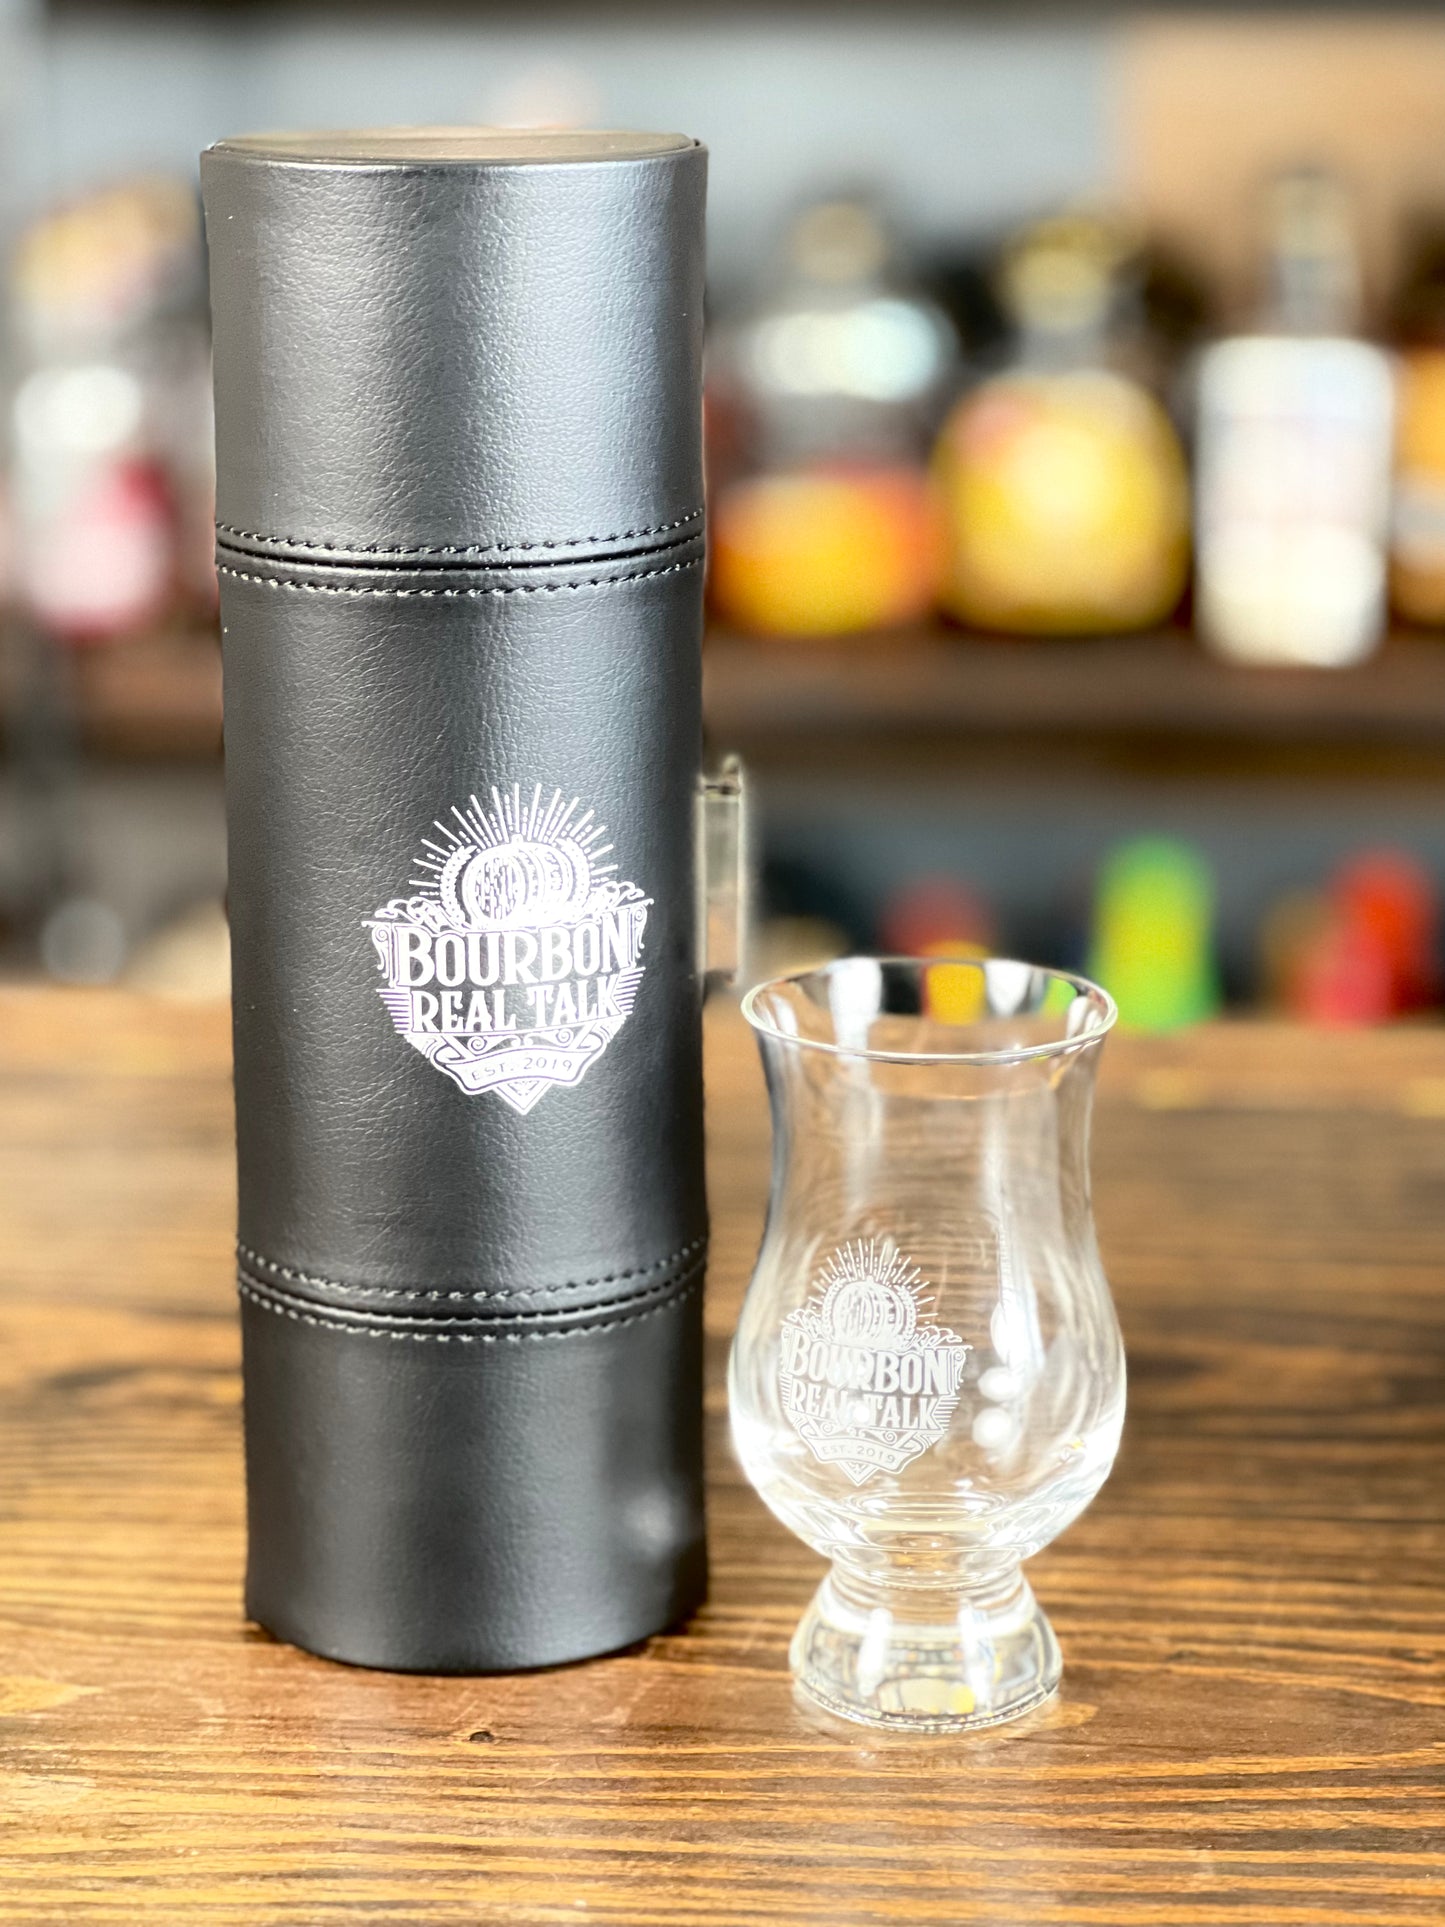 Bourbon Real Talk™ 6oz Tasting Glass Carrier WITH GLASSES, closed case with one glass on table next to the case